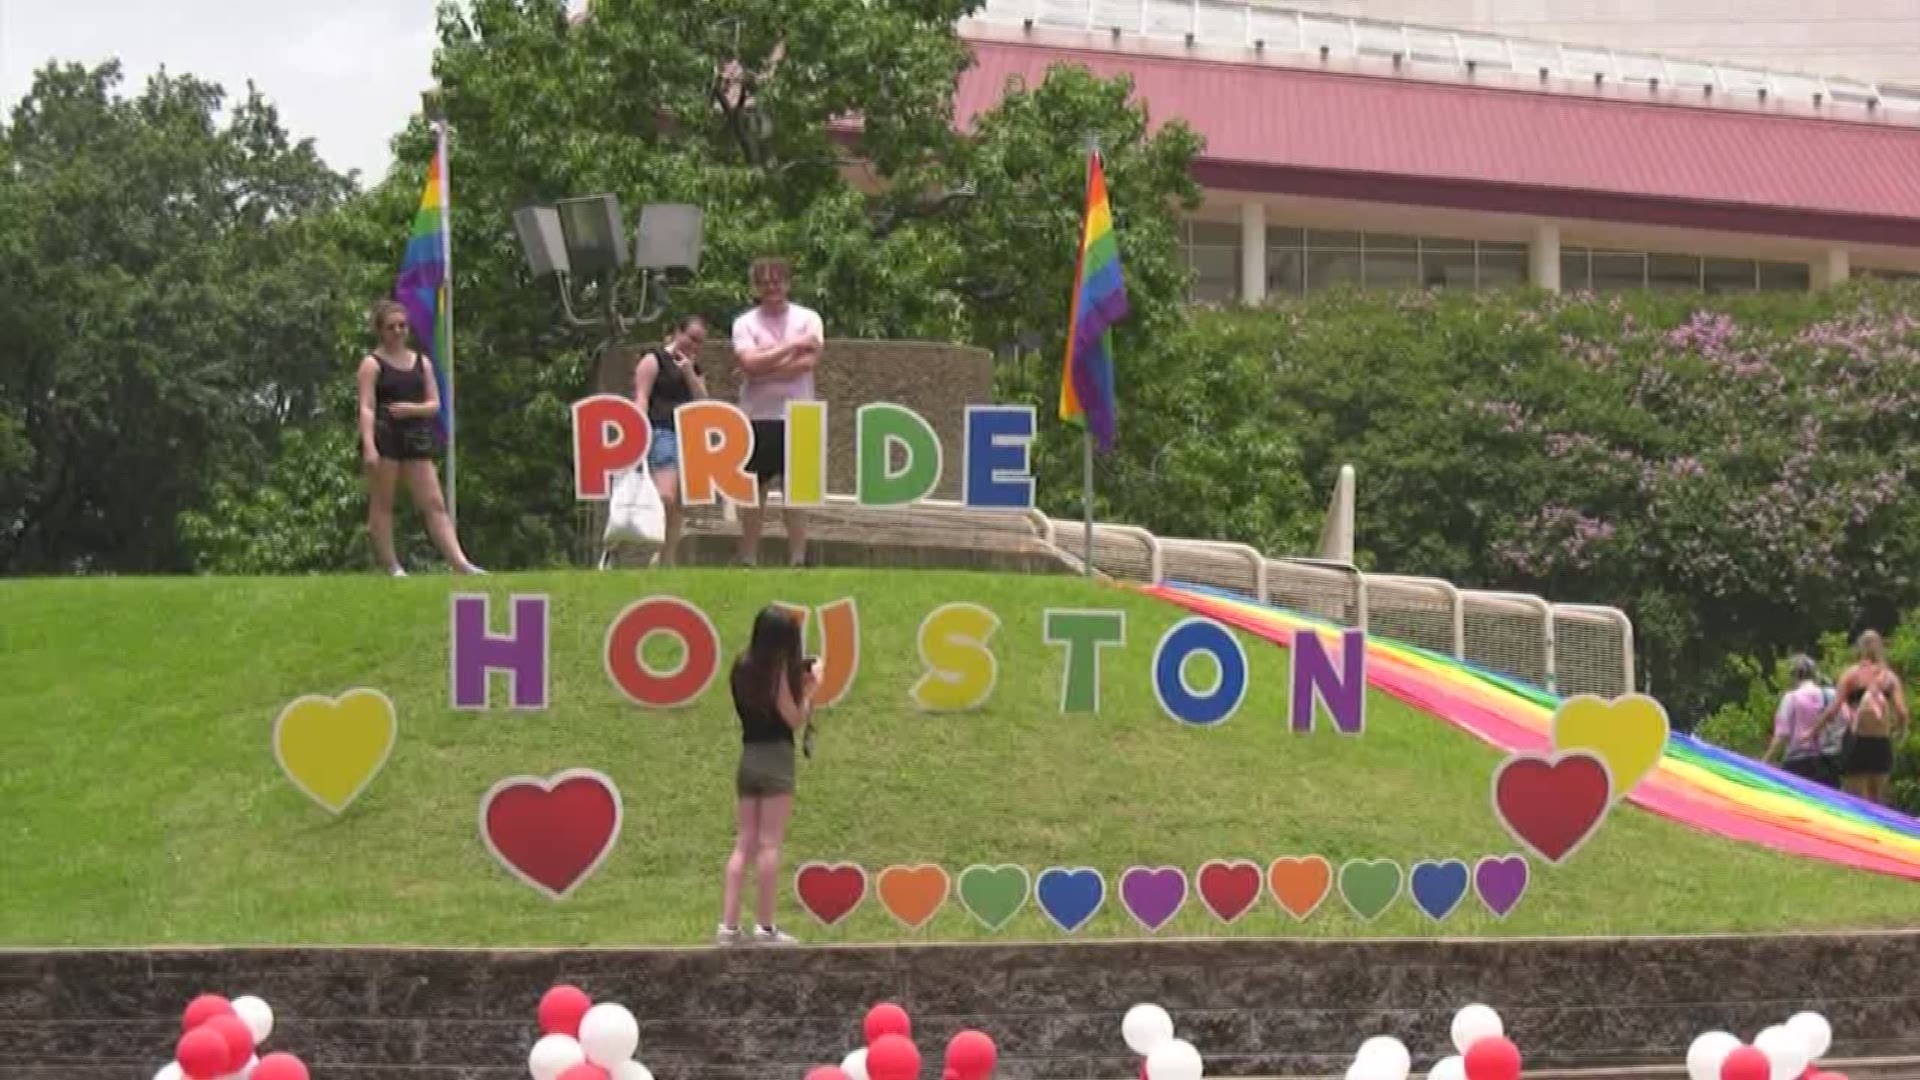 Hundreds of thousands of people across Houston are downtown celebrating Pride weekend. The festival kicked off Saturday afternoon with music, food and, of course, plenty of pride.